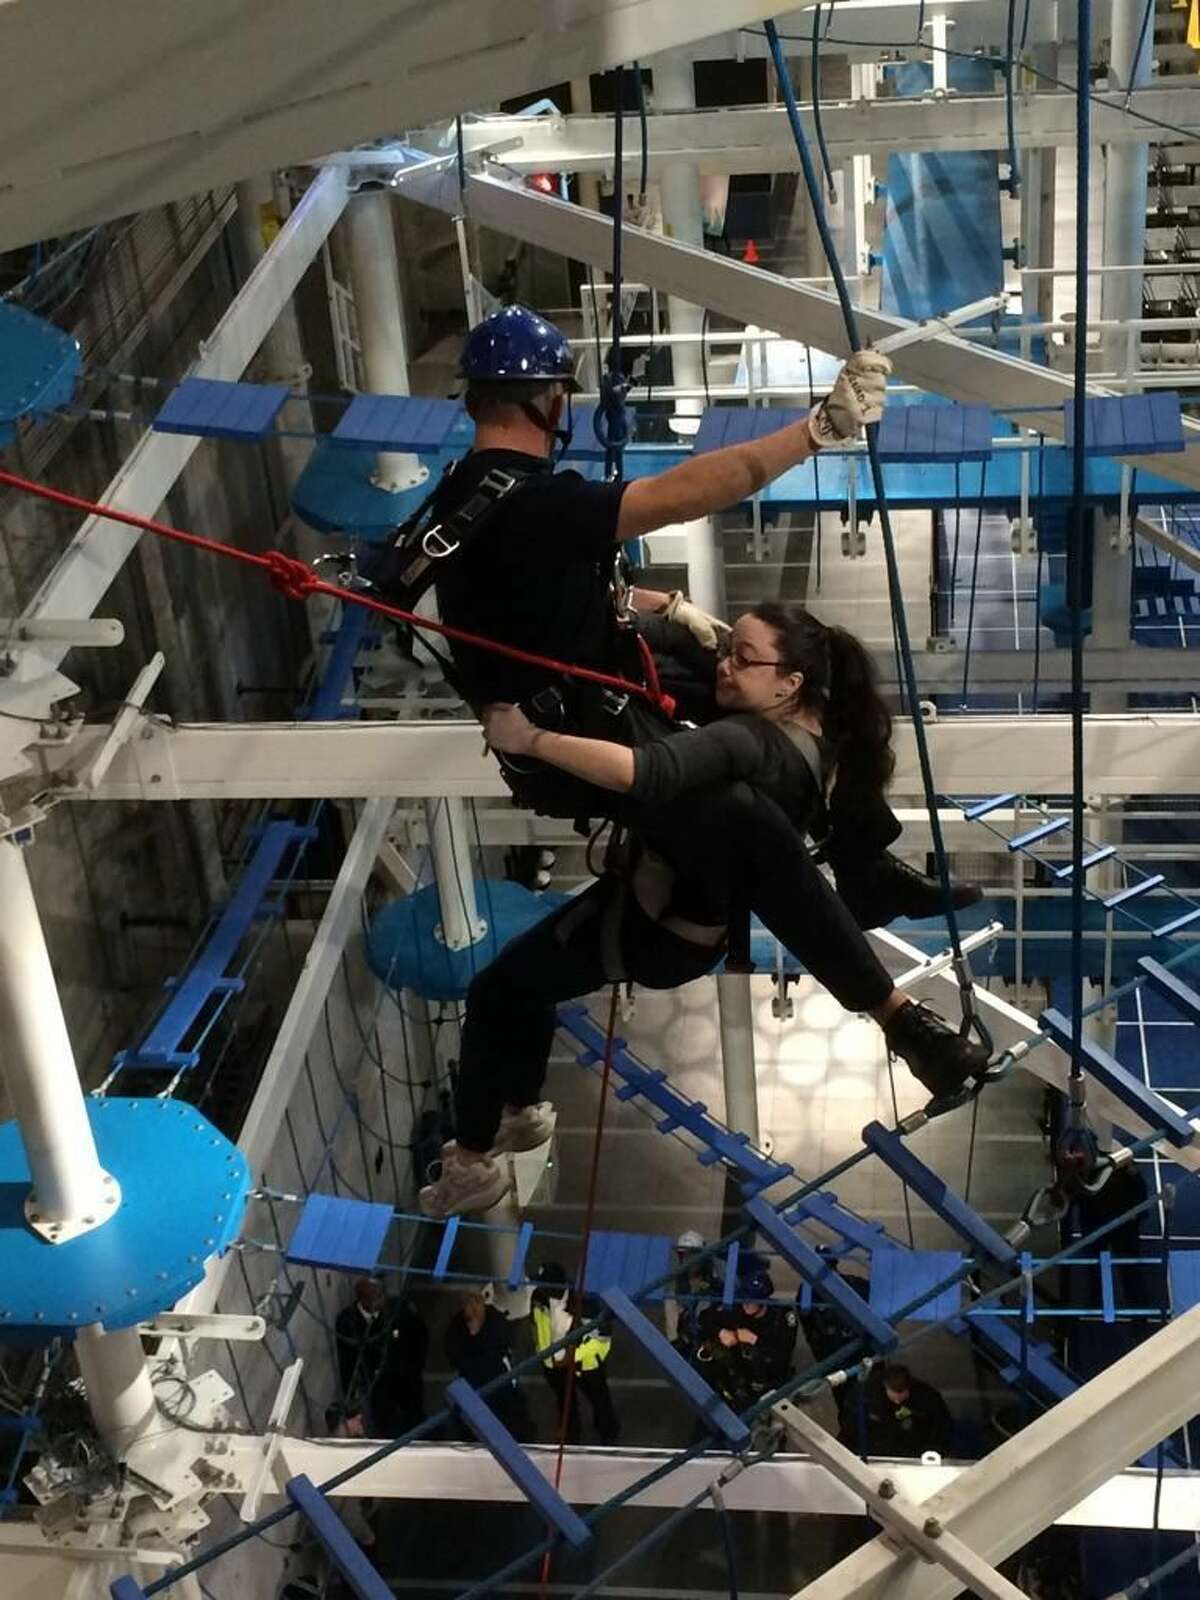 About 15 New Haven firefighters performed a series of training evolutions at Jordan?’s Furniture It Adventure Indoor Ropes Course Friday morning.